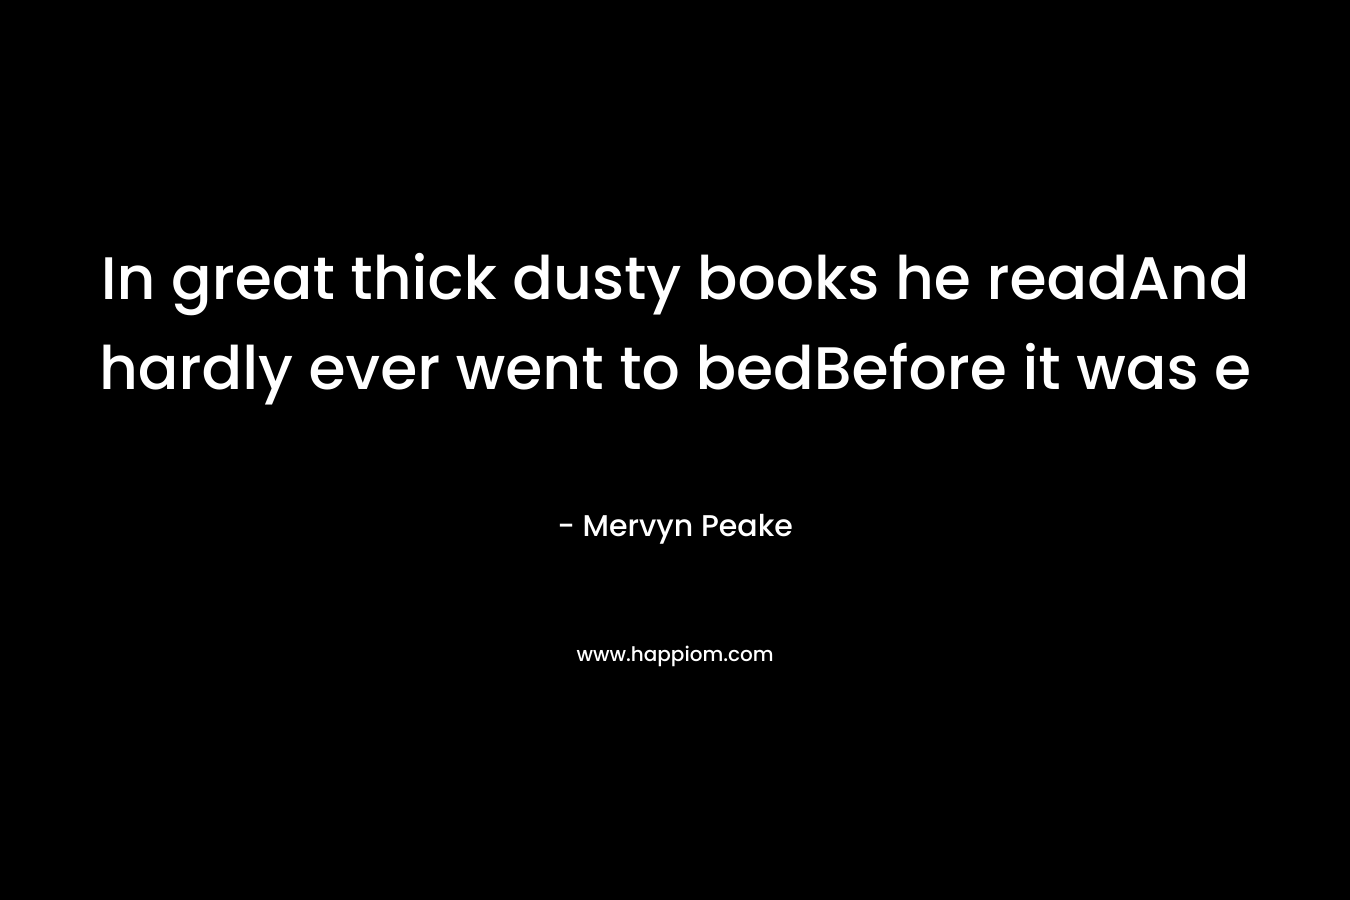 In great thick dusty books he readAnd hardly ever went to bedBefore it was e